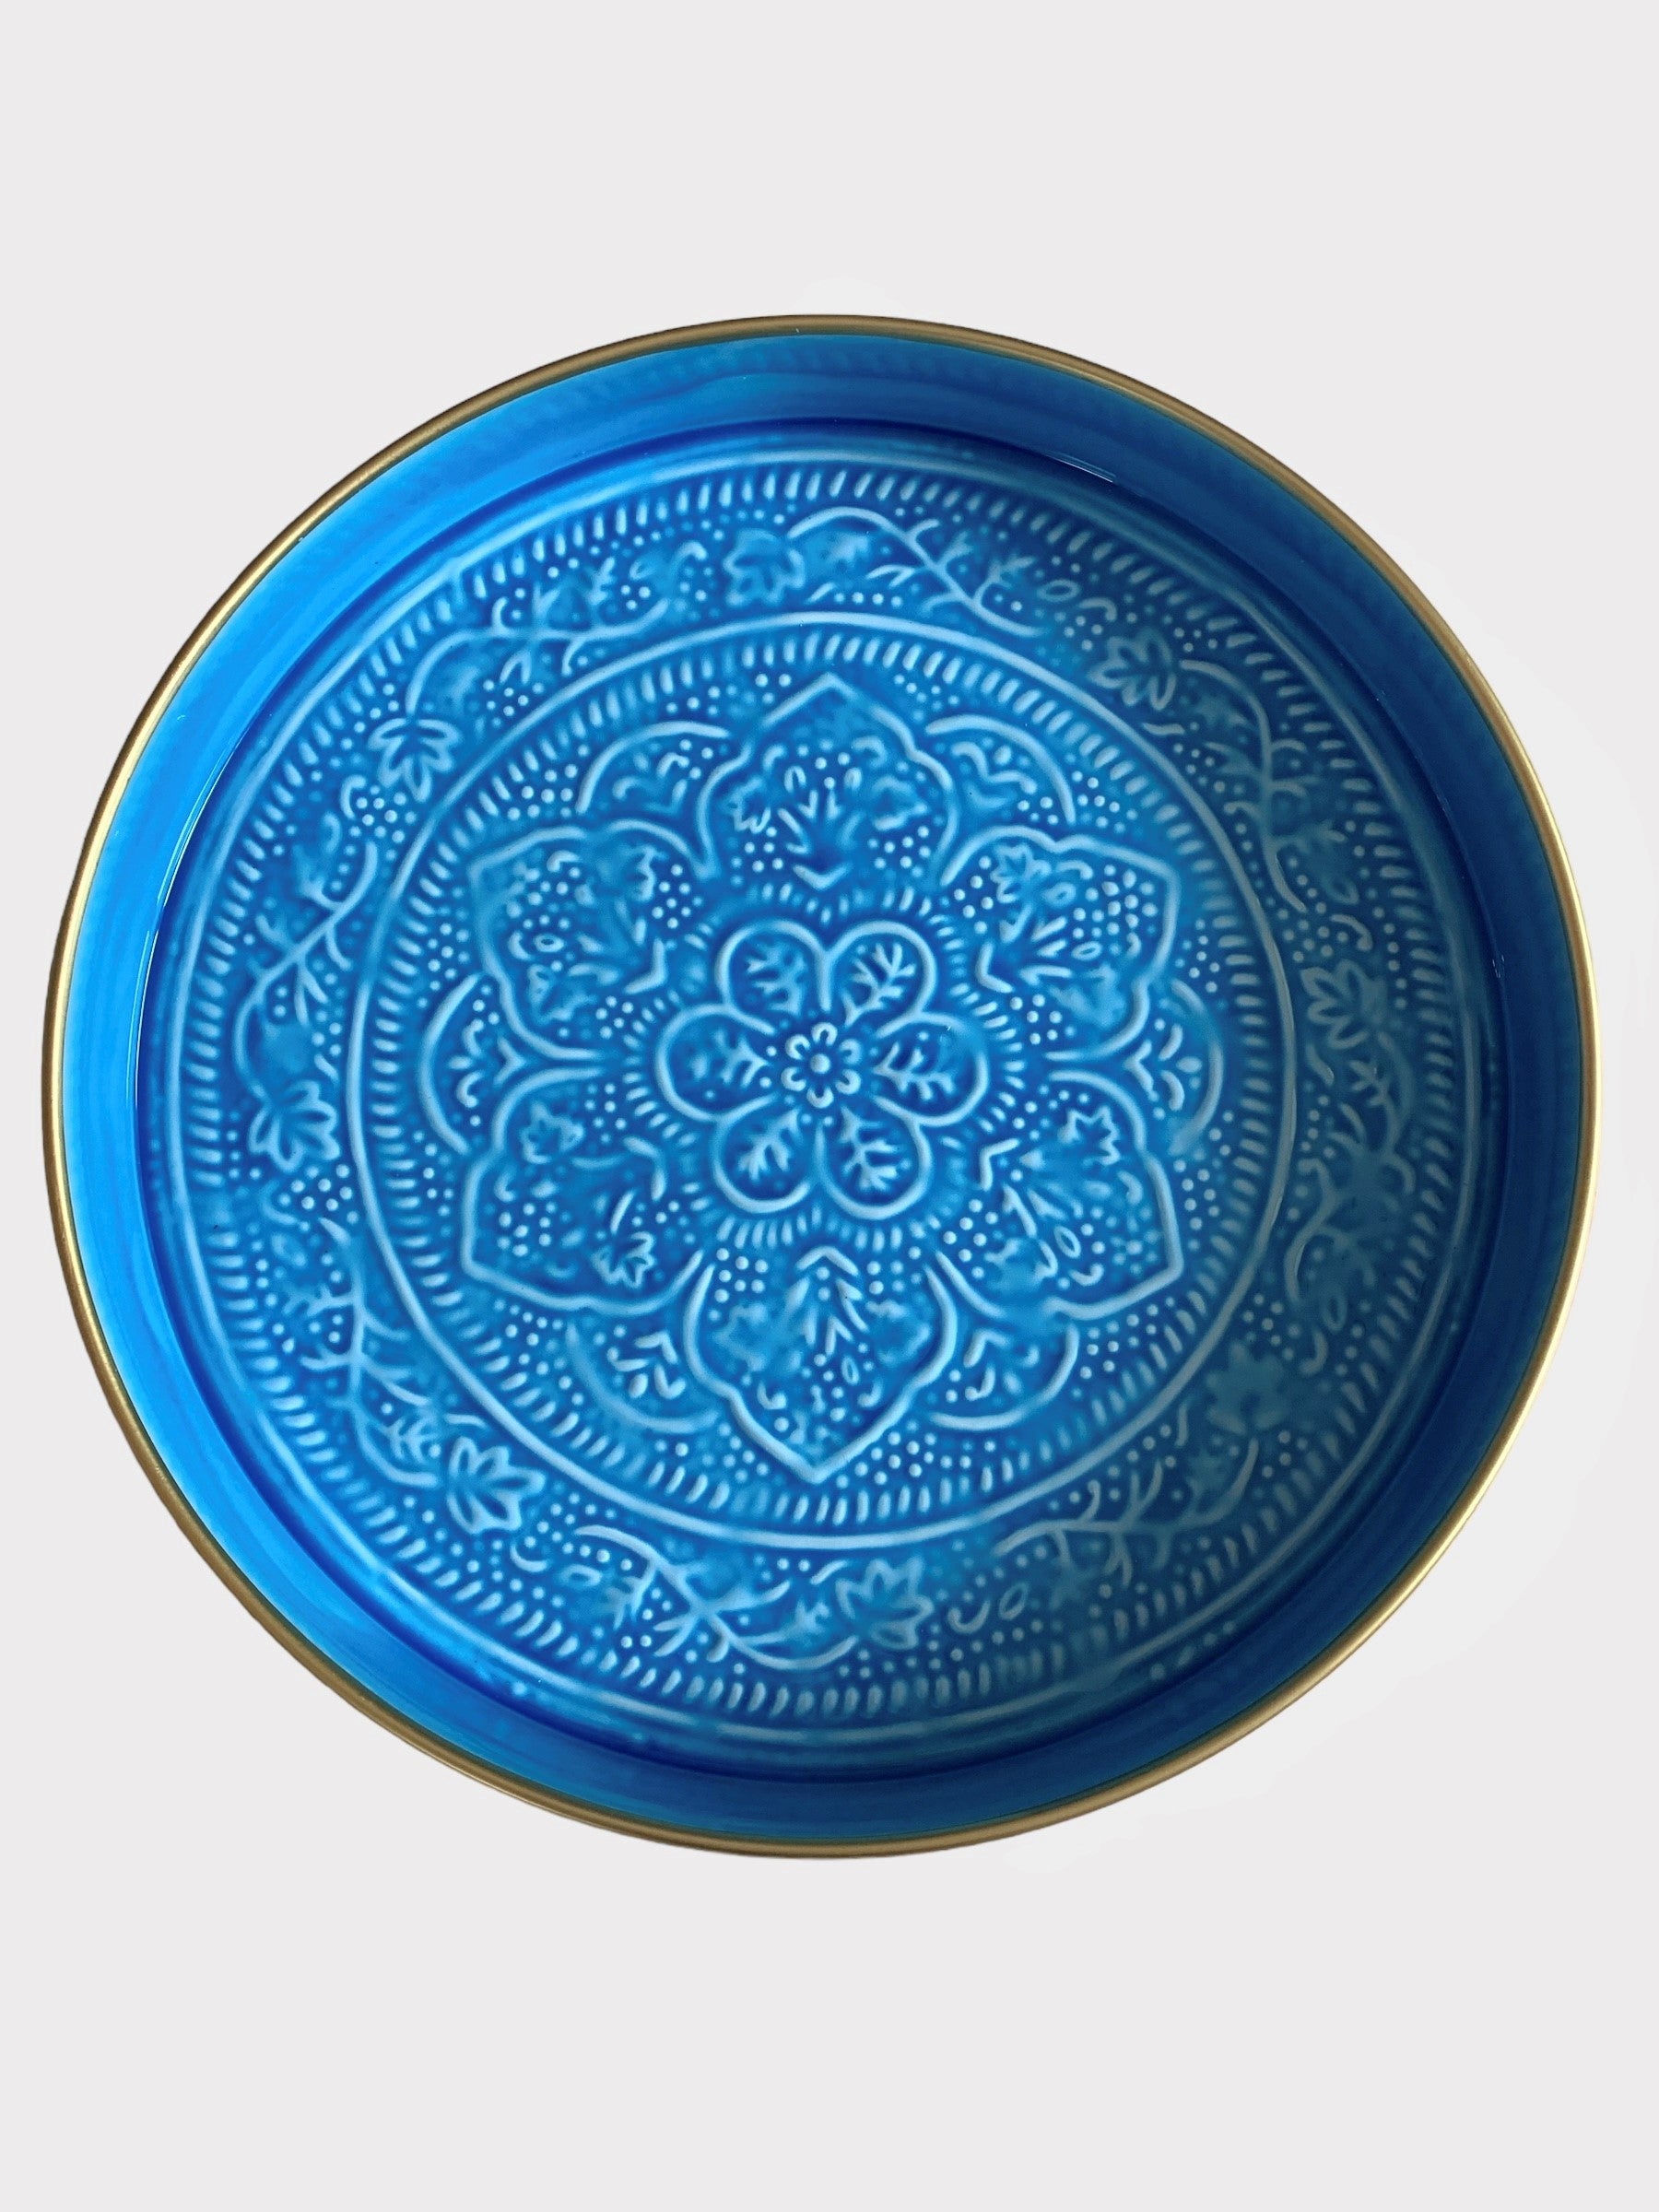 A bright blue enamel tray with floral embossing